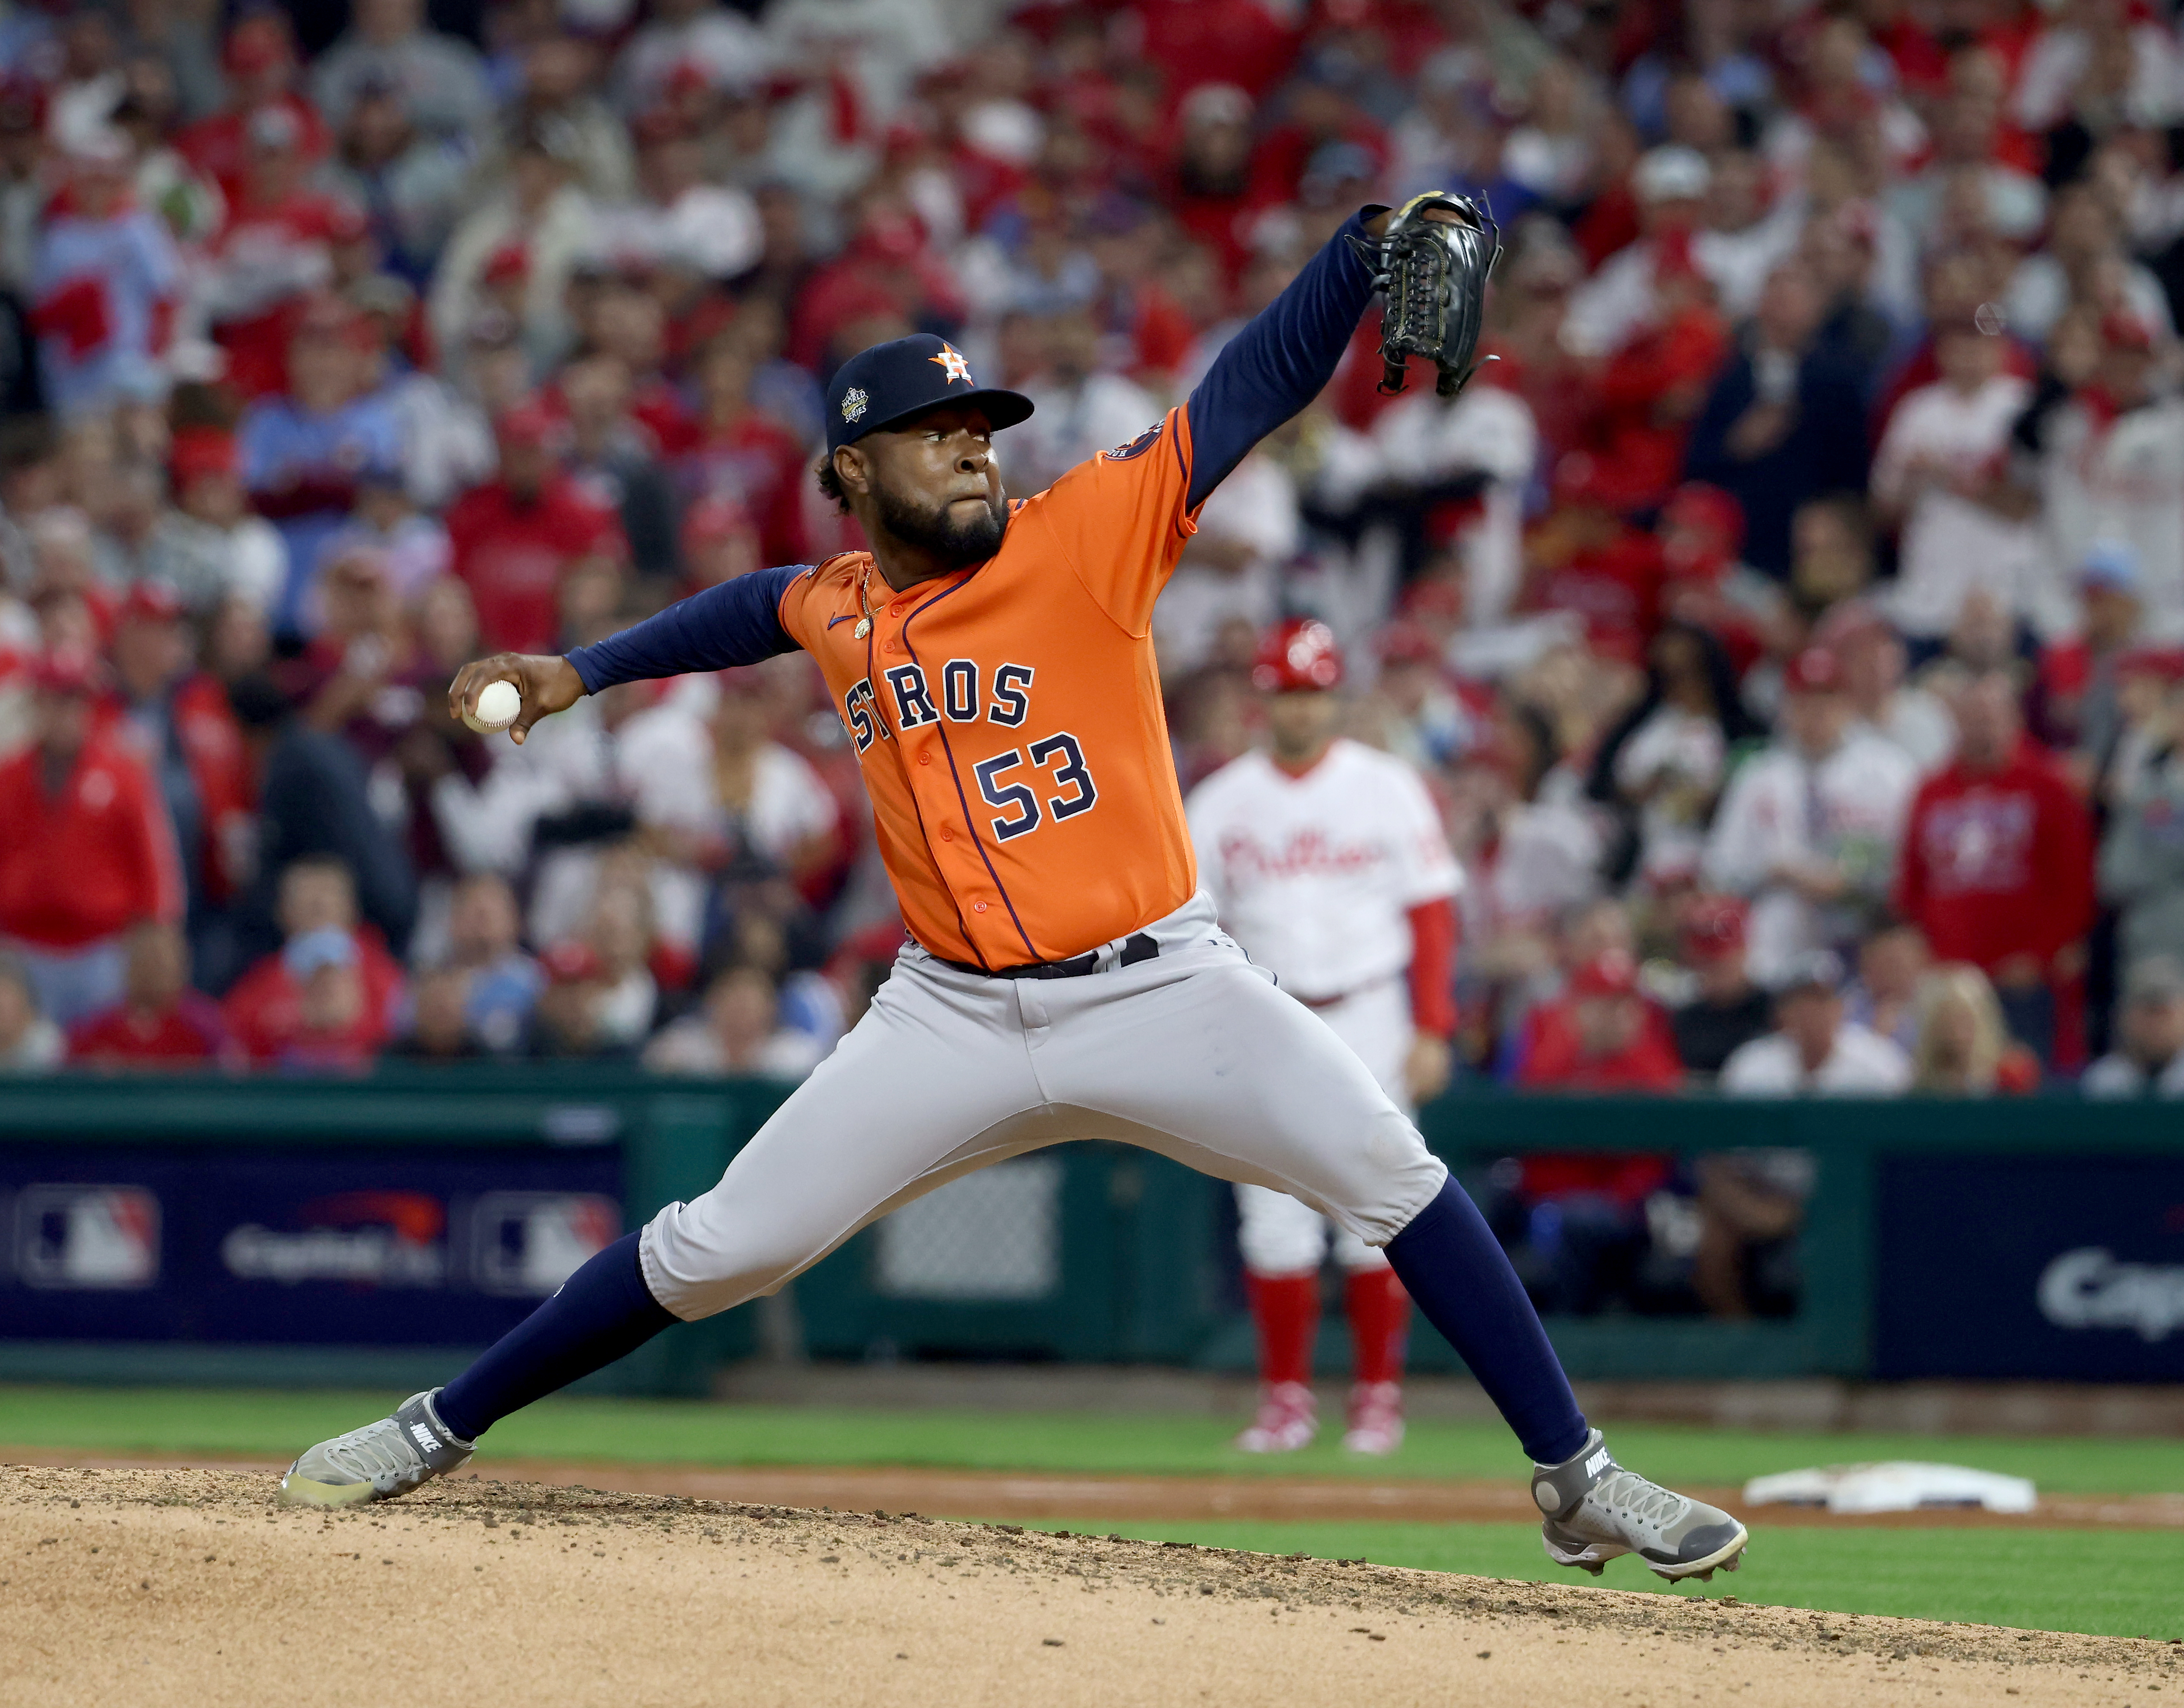 Astros combine to toss 2nd no-hitter in World Series history